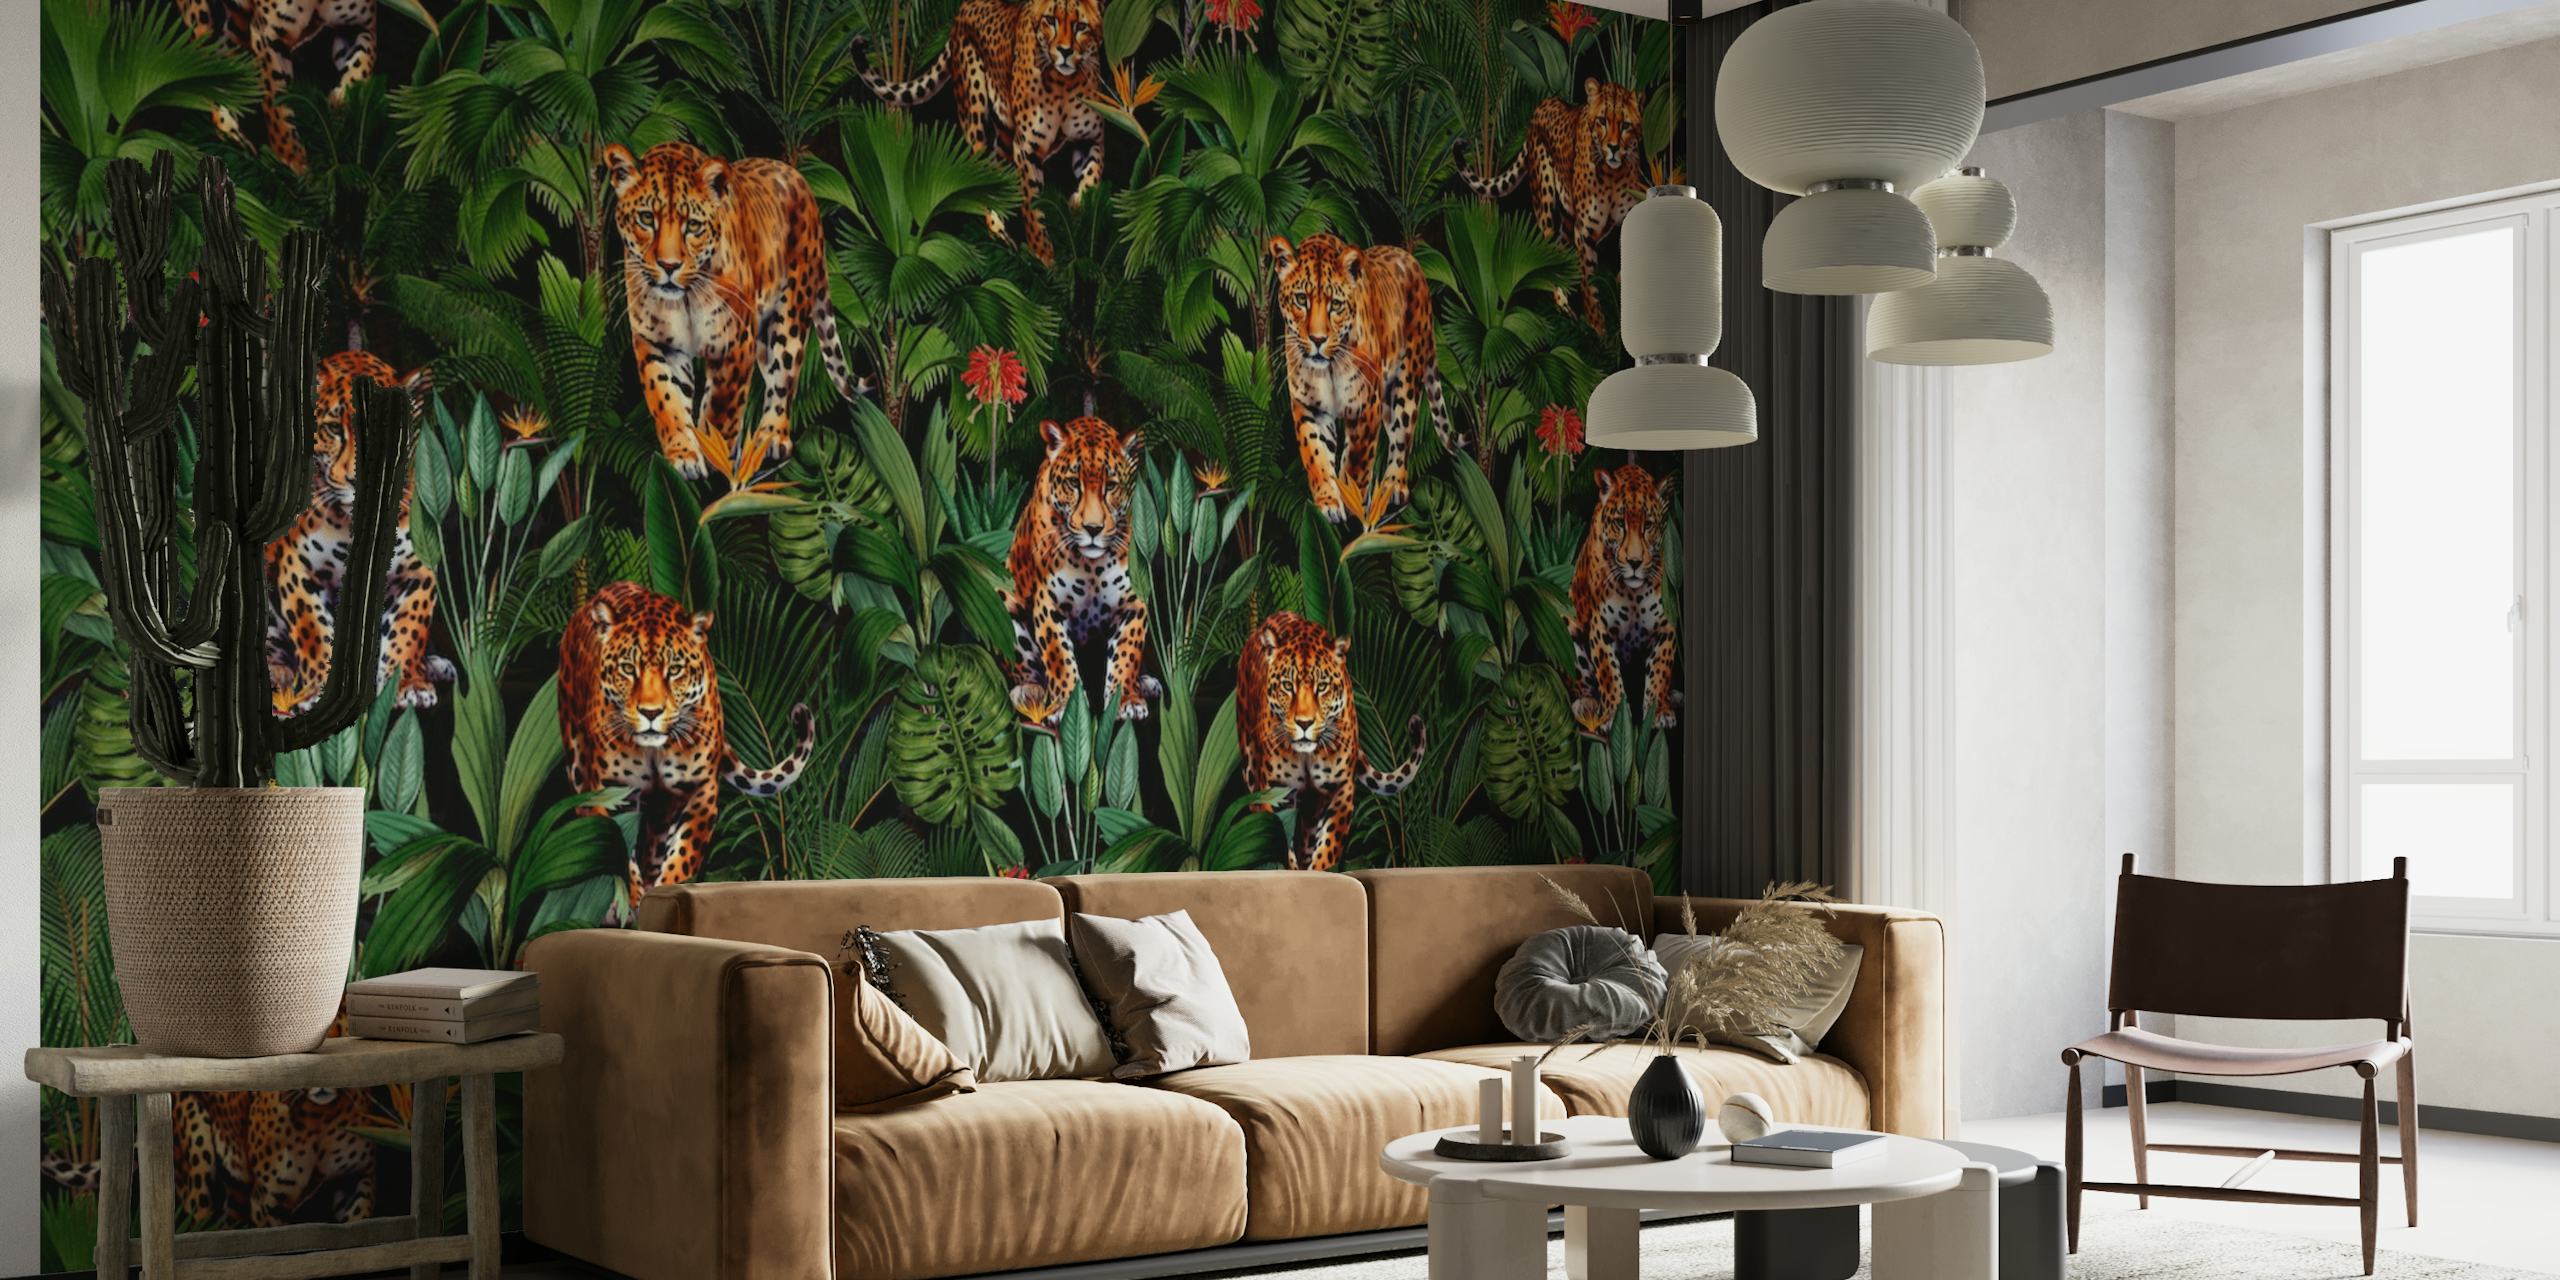 A lush jungle wall mural with tigers hidden amongst green foliage in a nighttime setting.